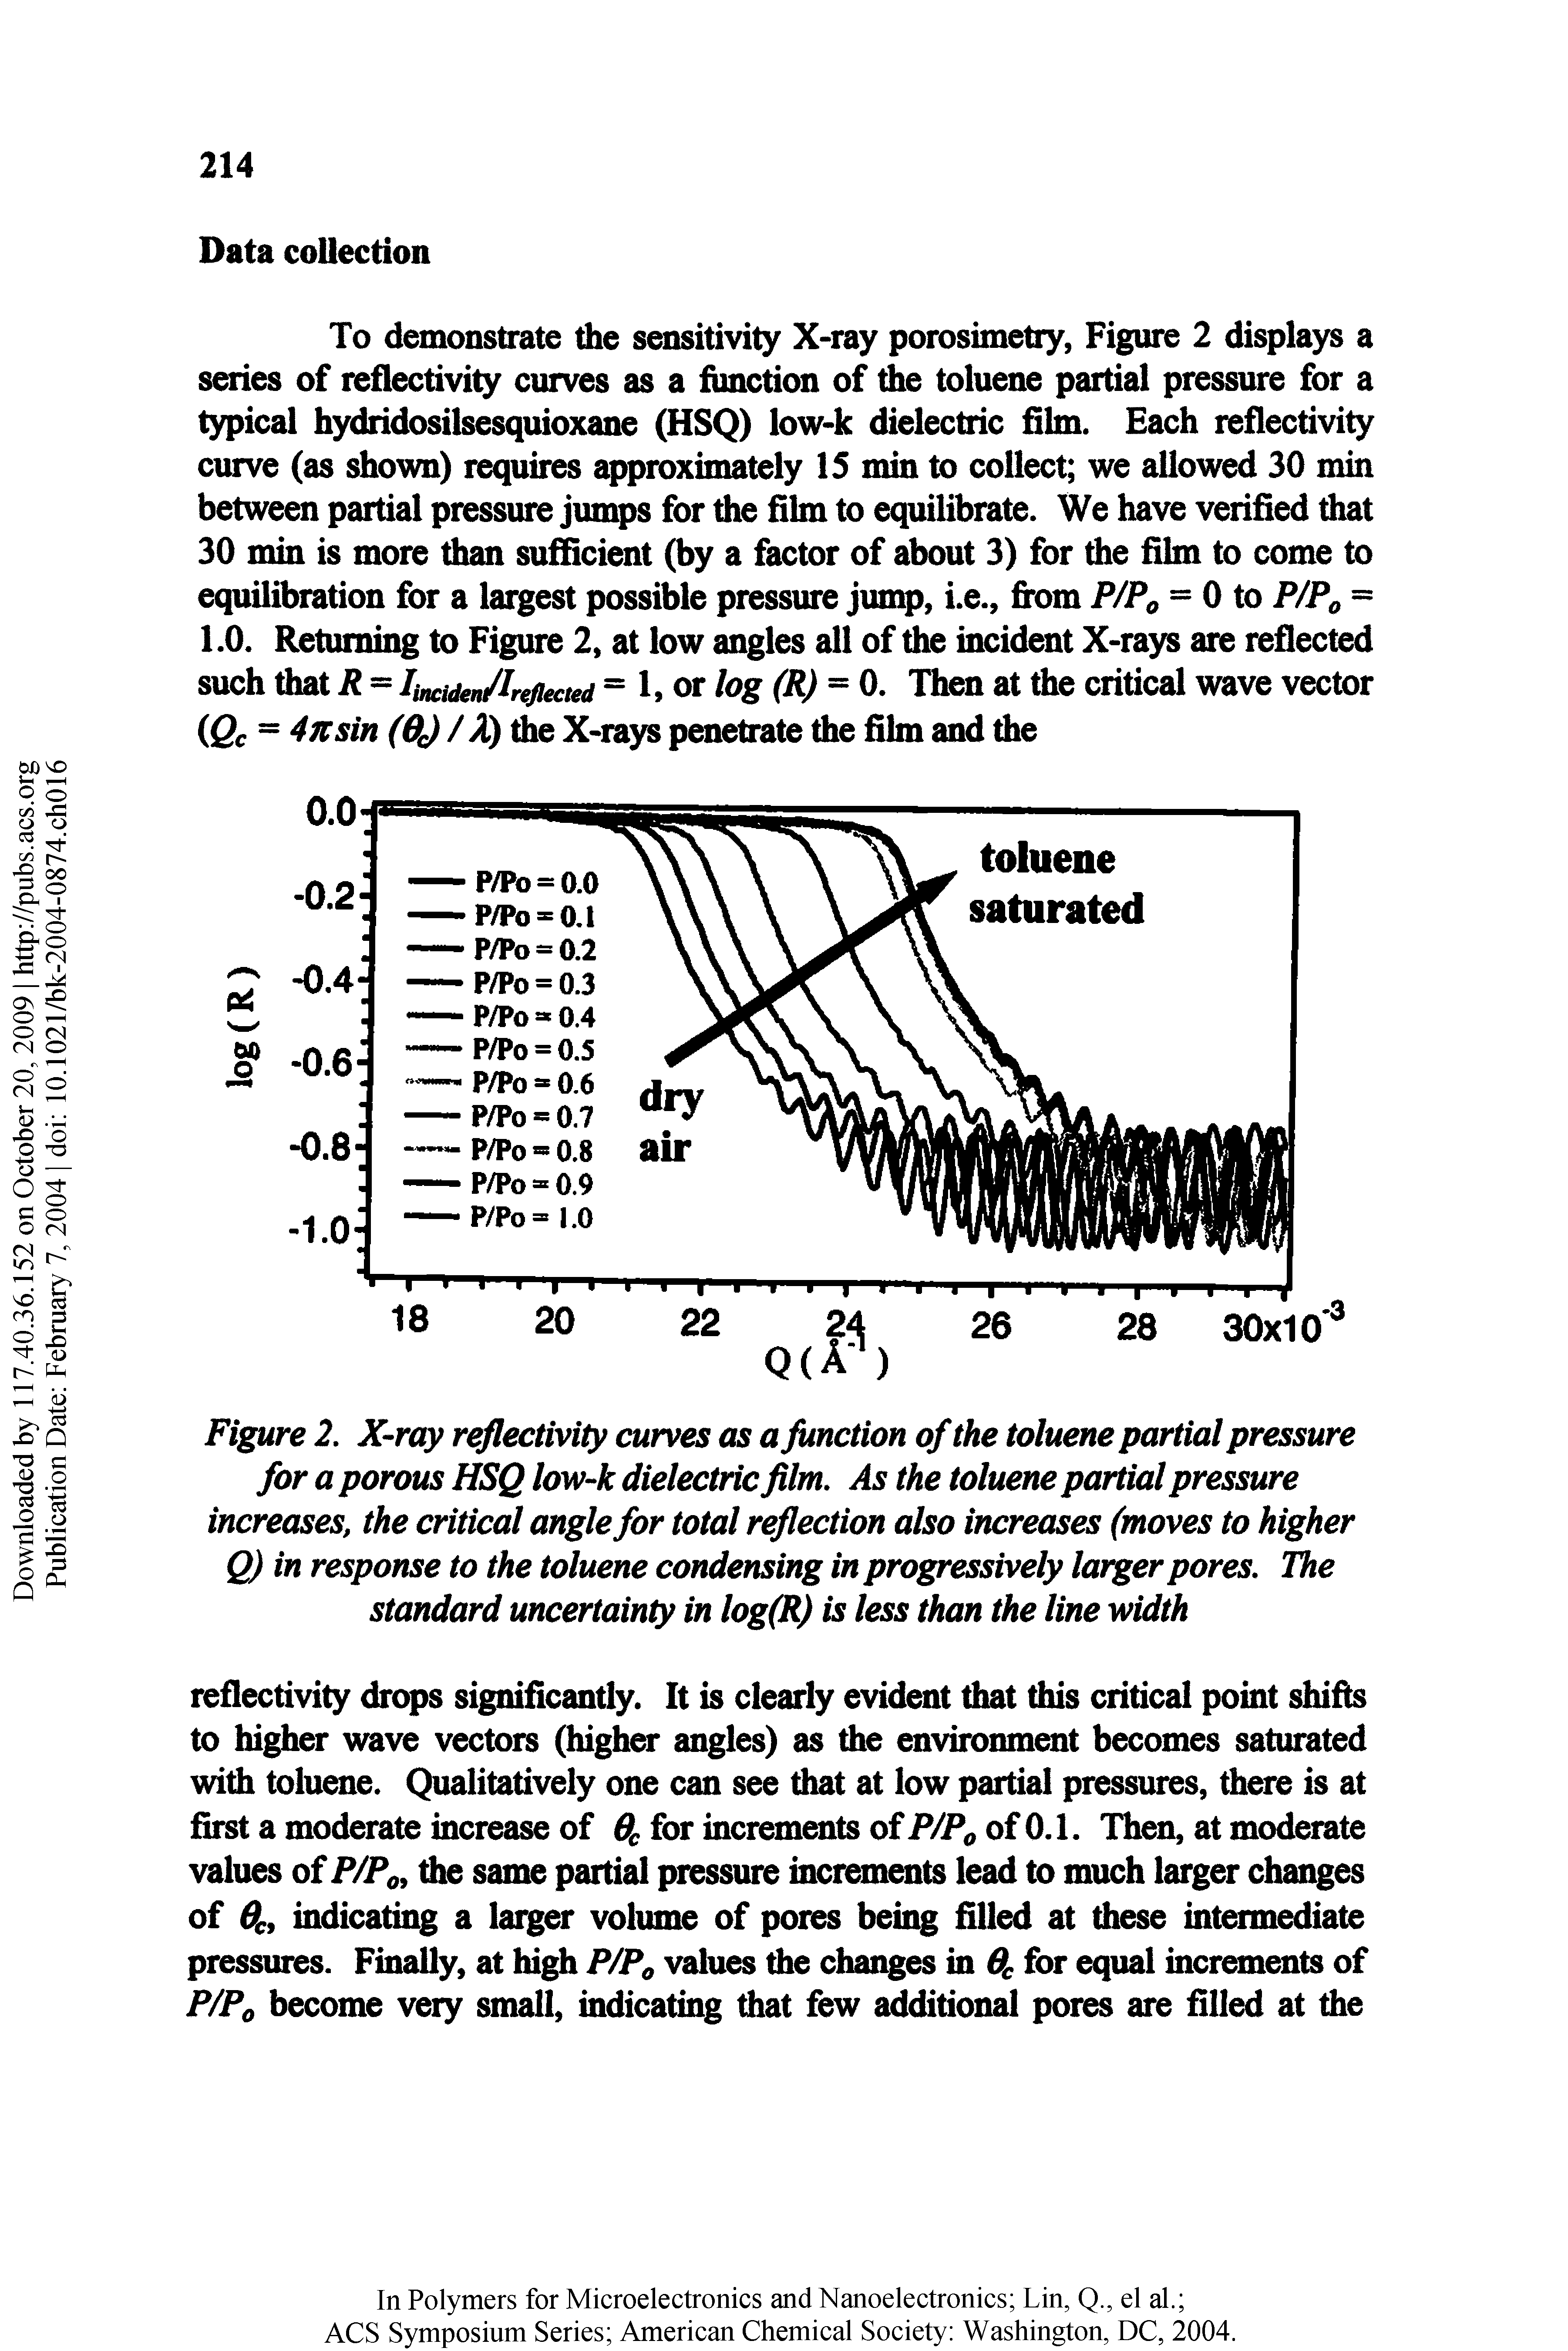 Figure 2. X-ray reflectivity curves as a fimction of the toluene partial pressure for a porous HSQ low-k dielectric film. As the toluene partial pressure increases, the critical angle for total reflection also increases (moves to higher 0) in response to the toluene condensing in progressively larger pores. The standard uncertainty in log(R) is less than the line width...